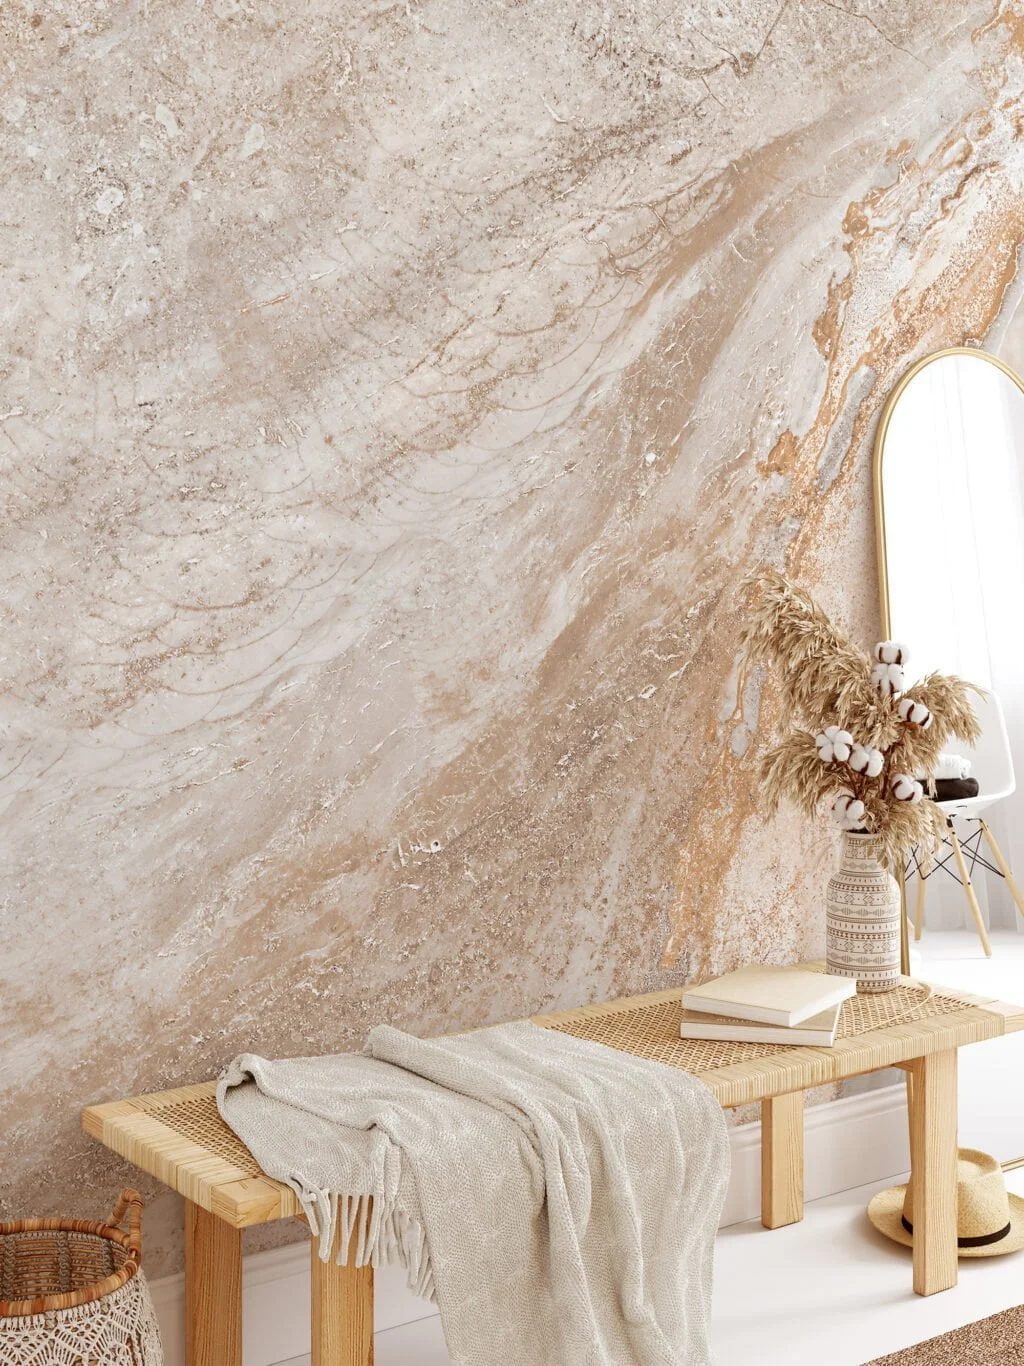 Nude Marble Stone Wall Mural - Self-Adhesive Peel & Stick Wallpaper for Natural Home Decor